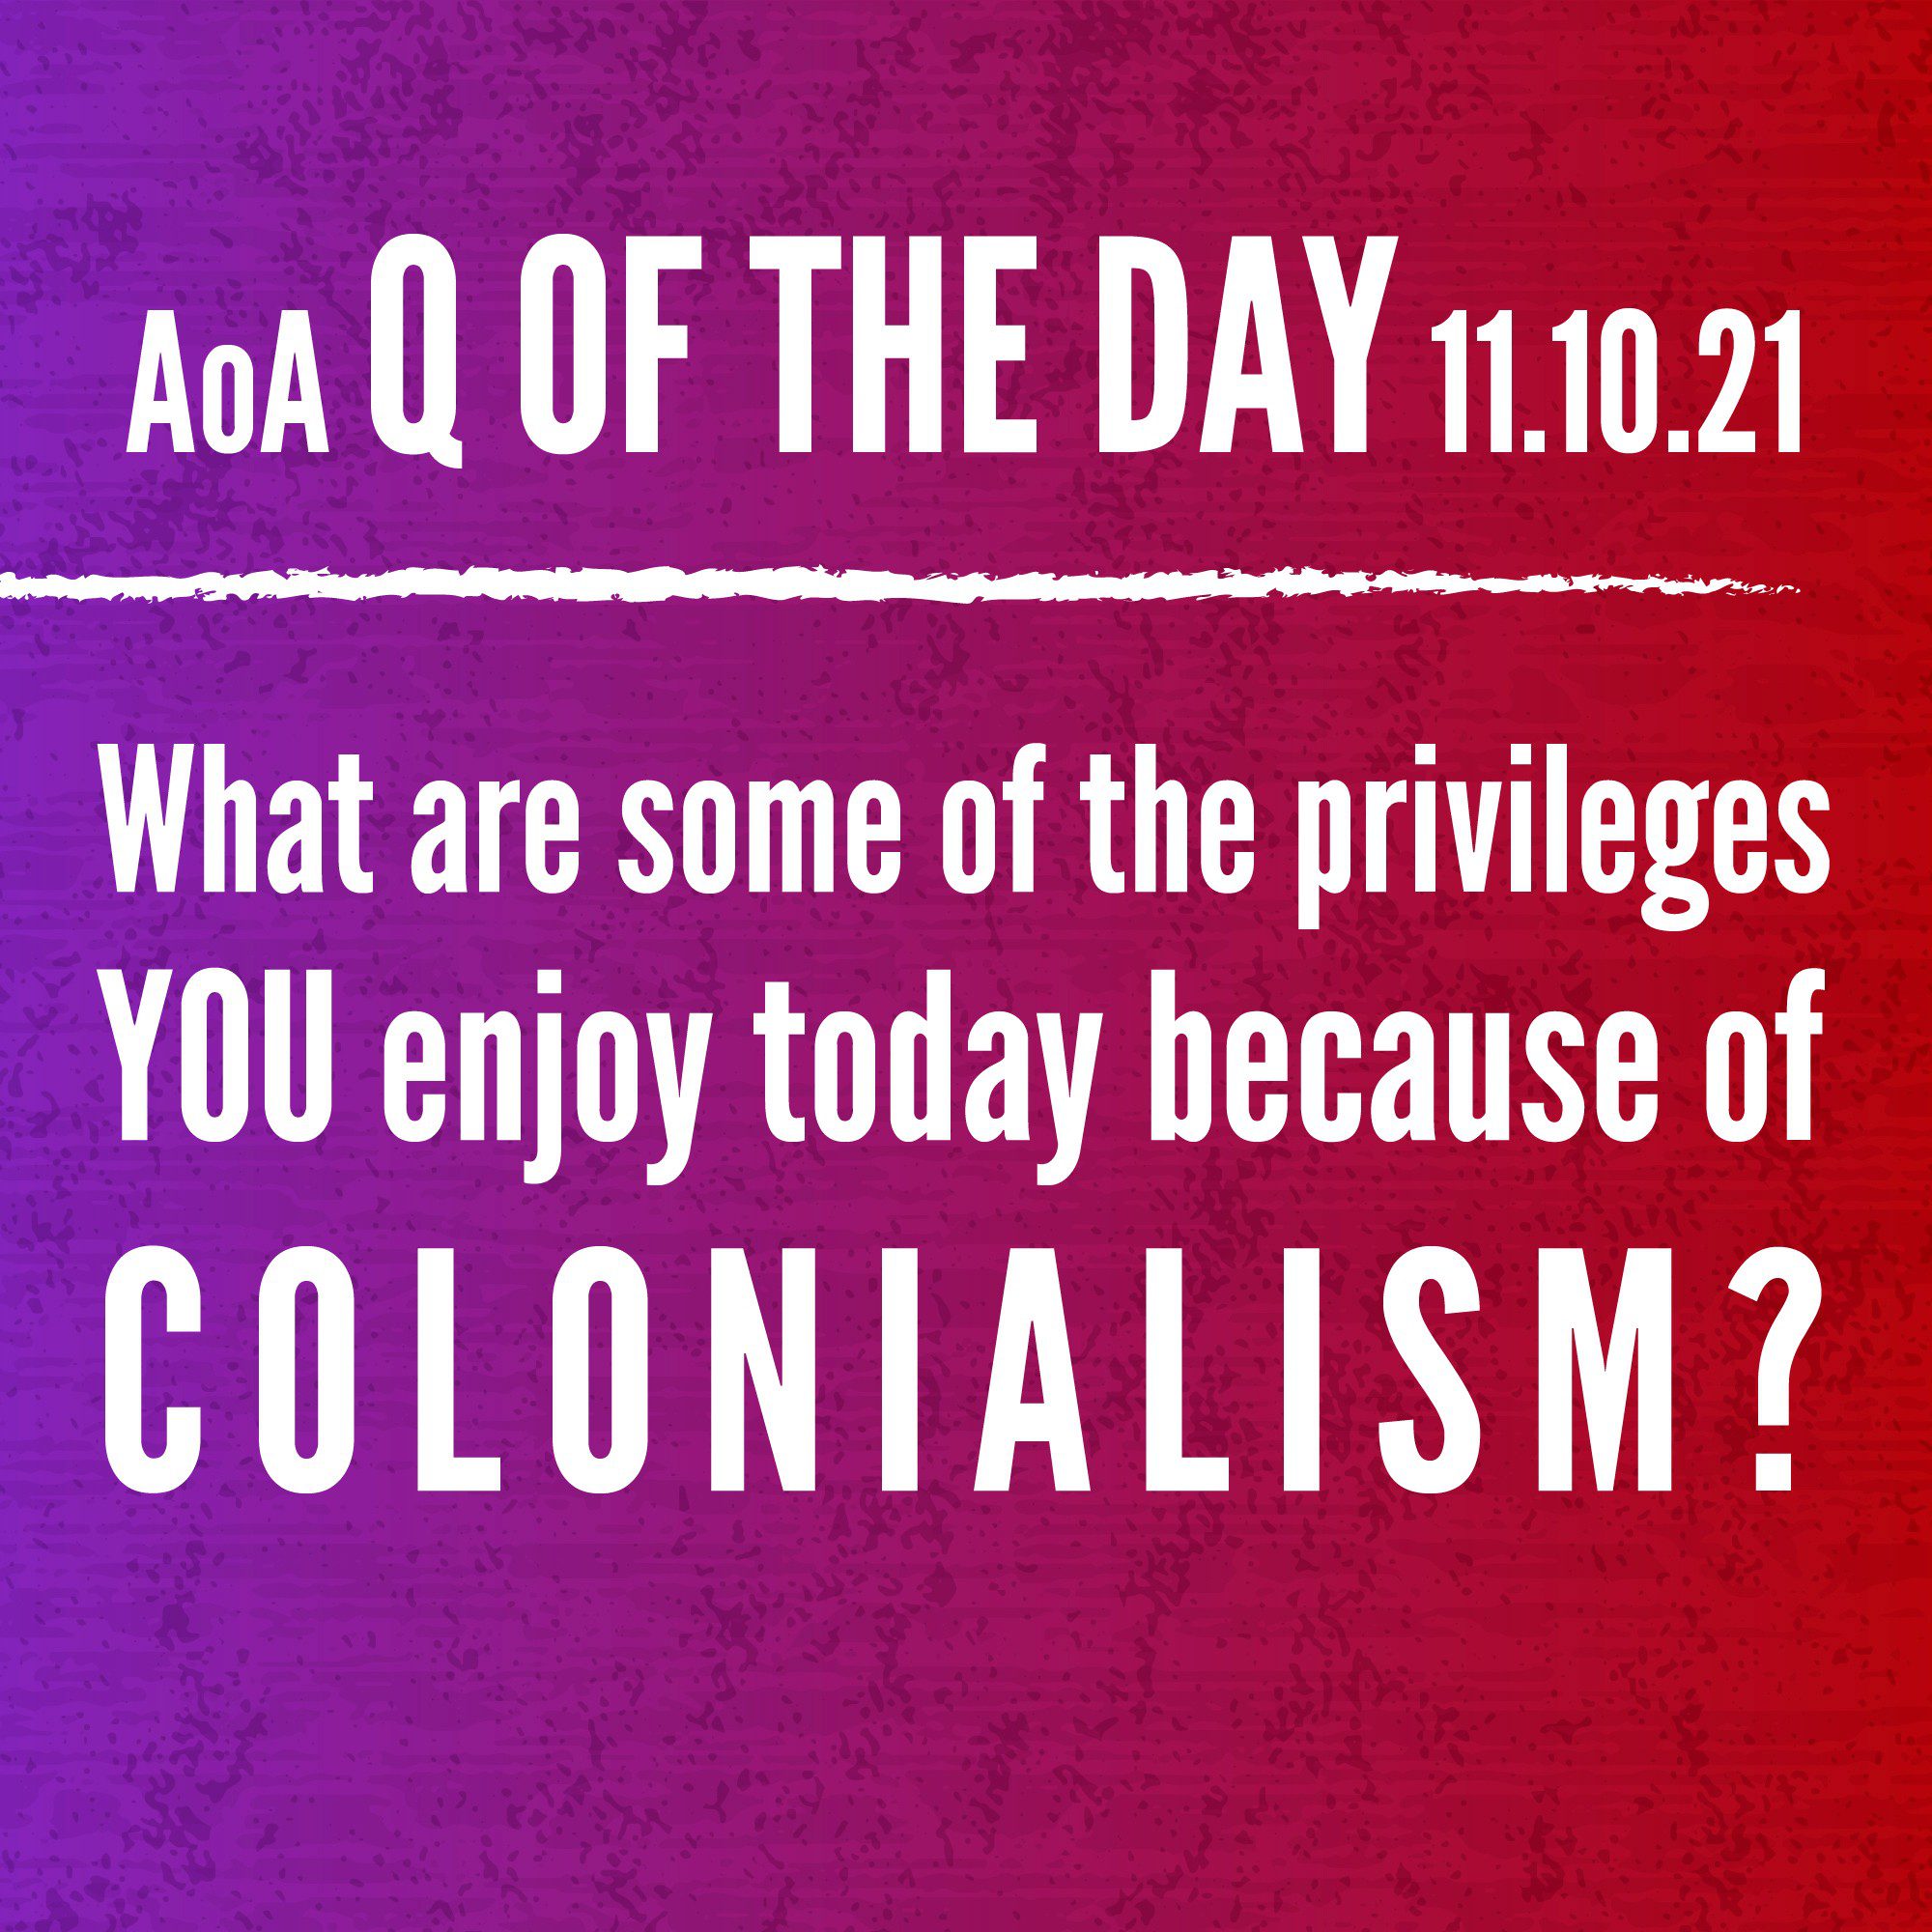 AoA Q of the Day November 10, 2021: What are some of the privileges you enjoy today because of colonialism?